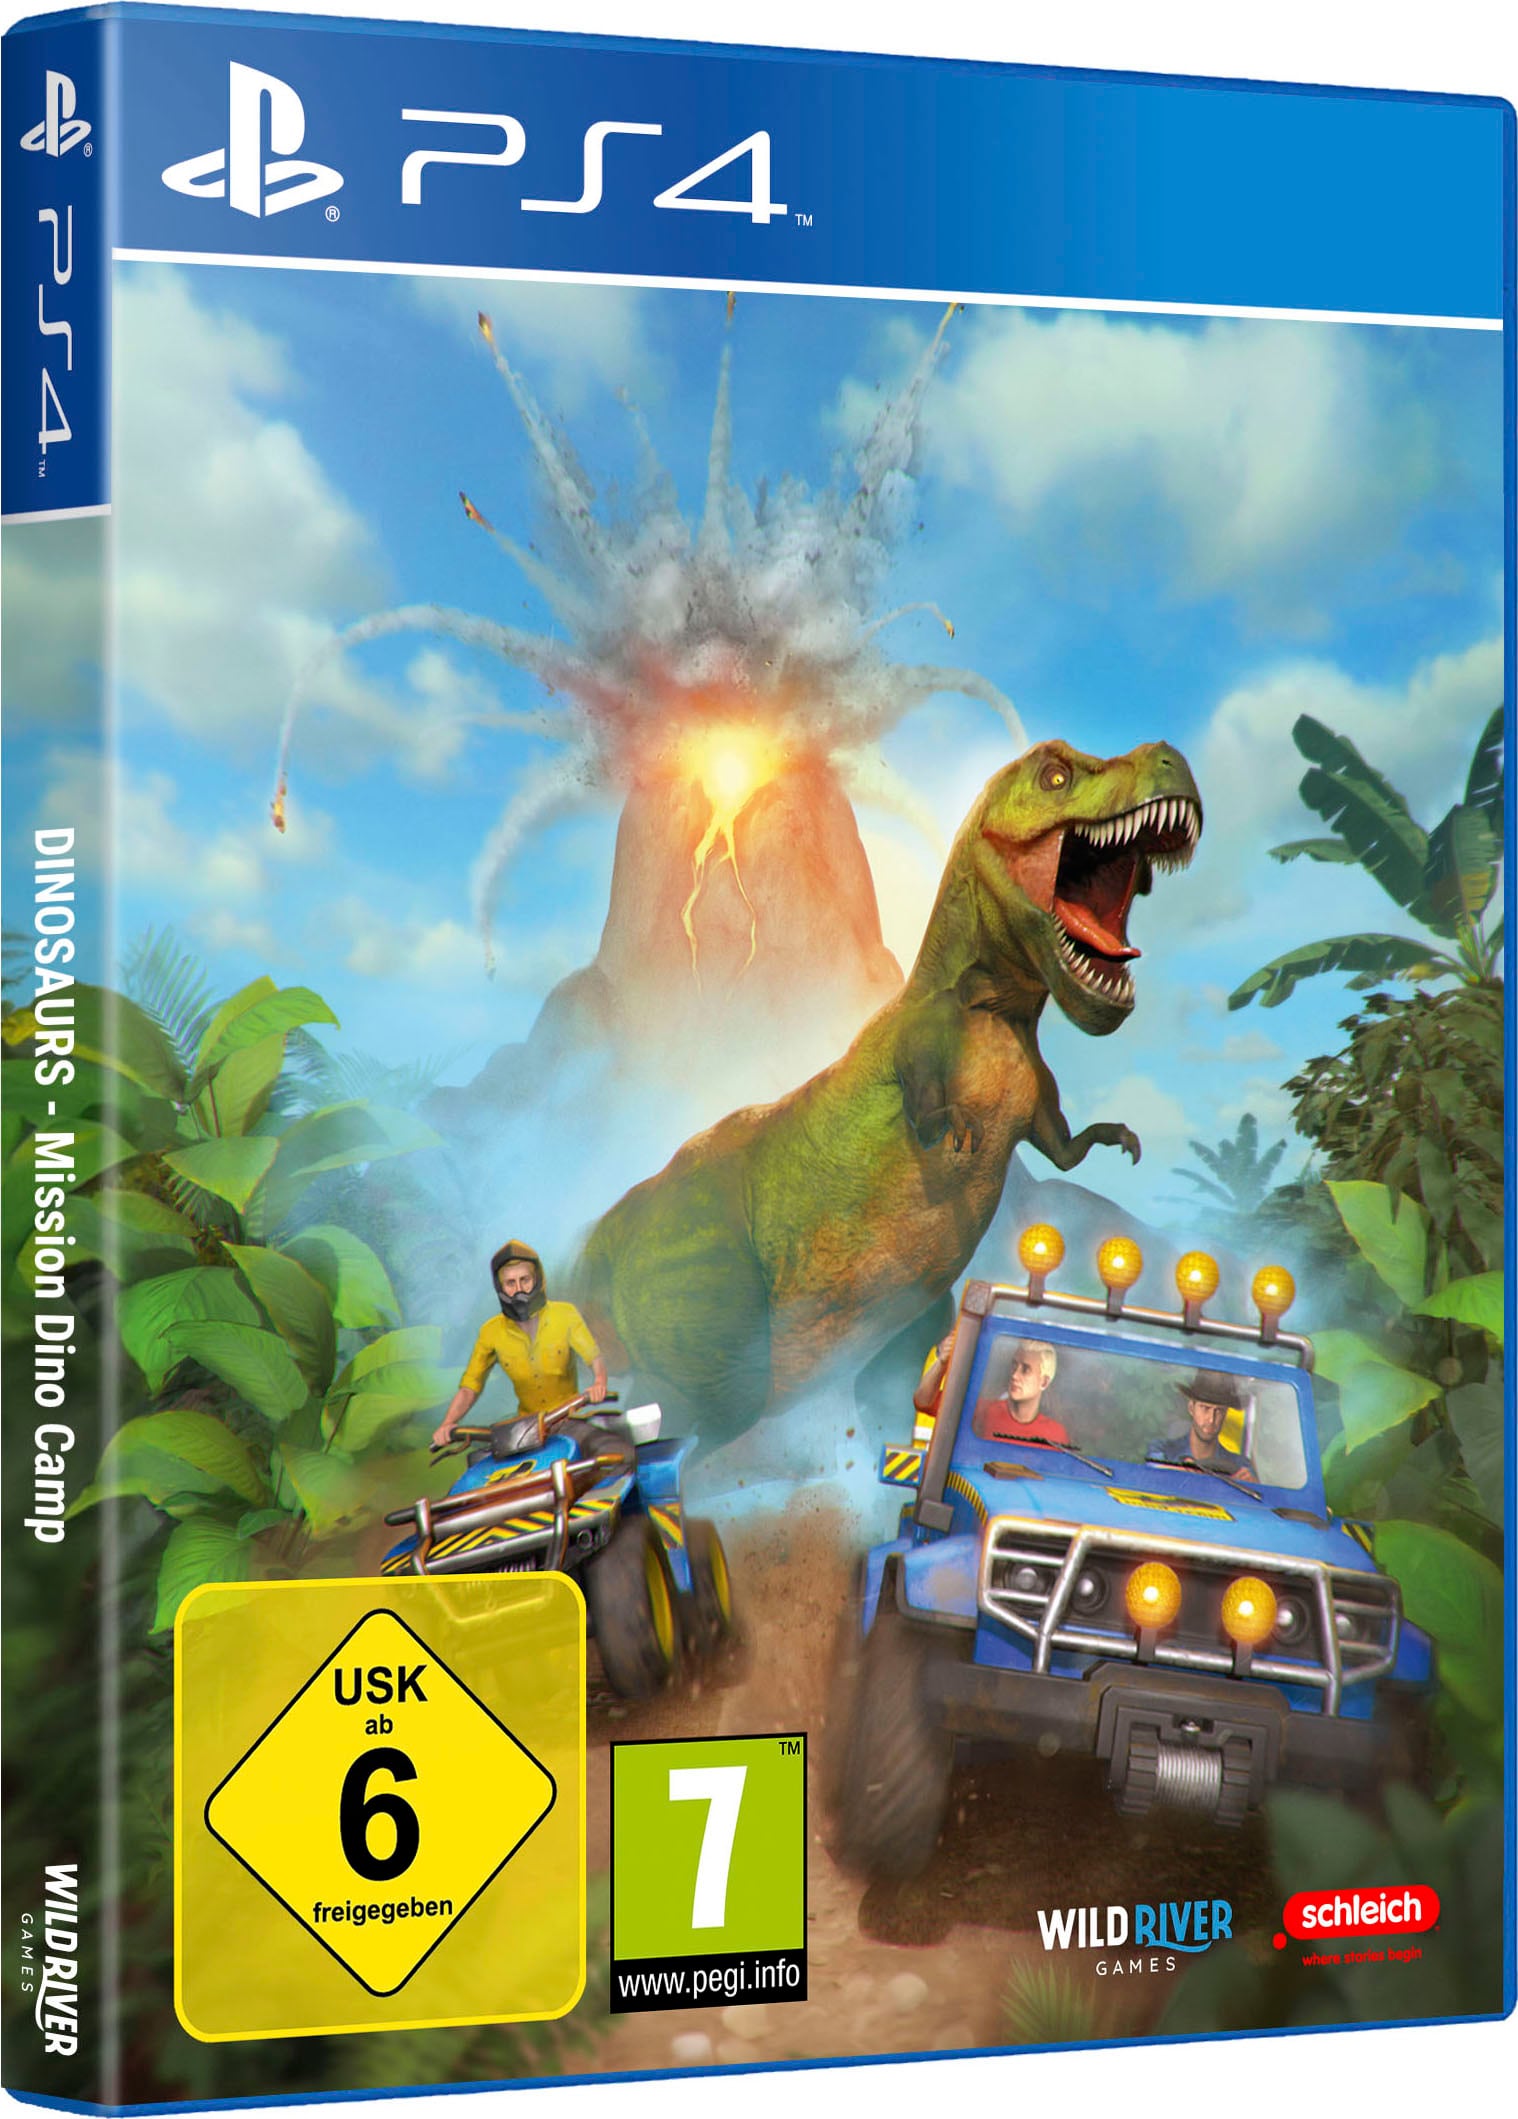 Camp«, Spielesoftware Software 4 Mission PlayStation »Dinosaurs: bei Dino Pyramide